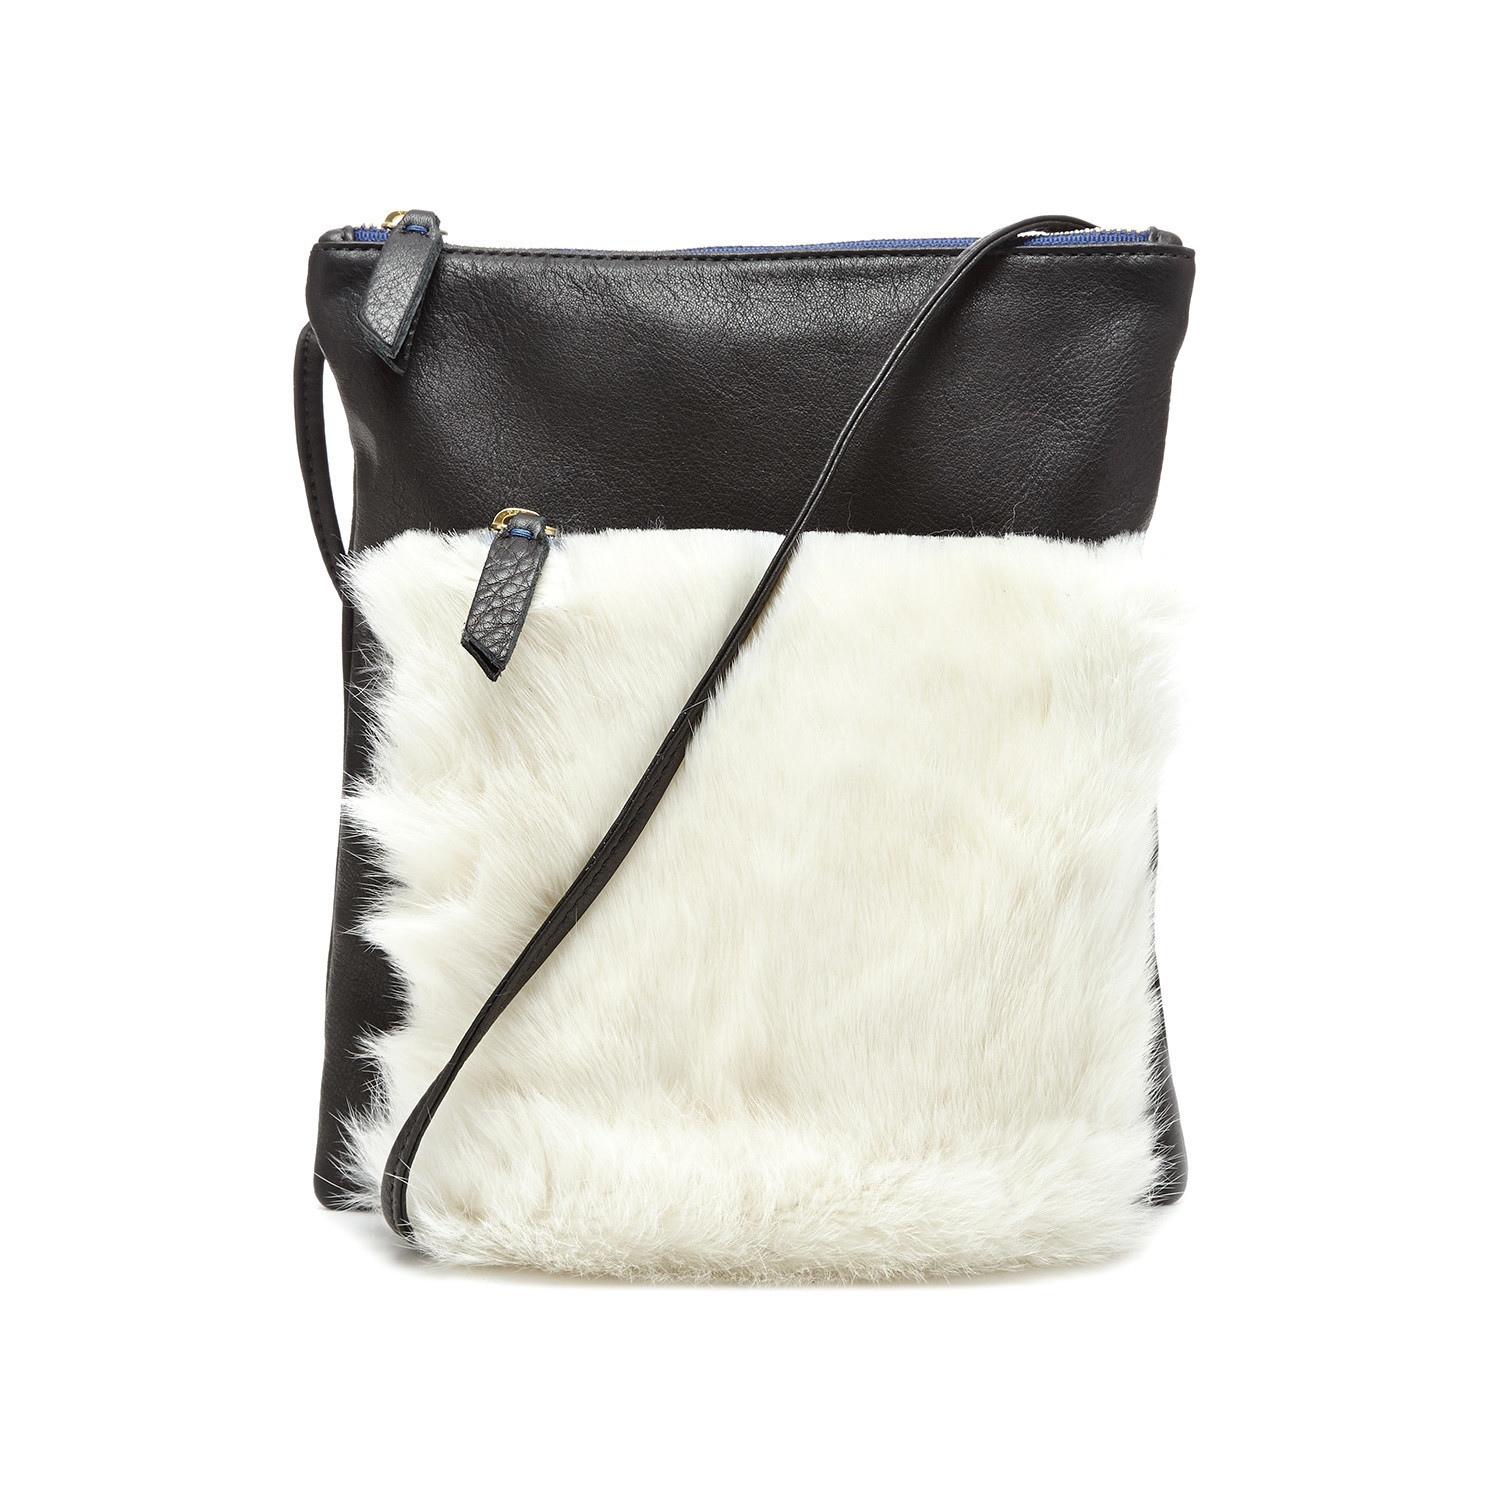 Campos Bags: Yin Yang Genuine Leather & Fur Bag (Many Colors!)